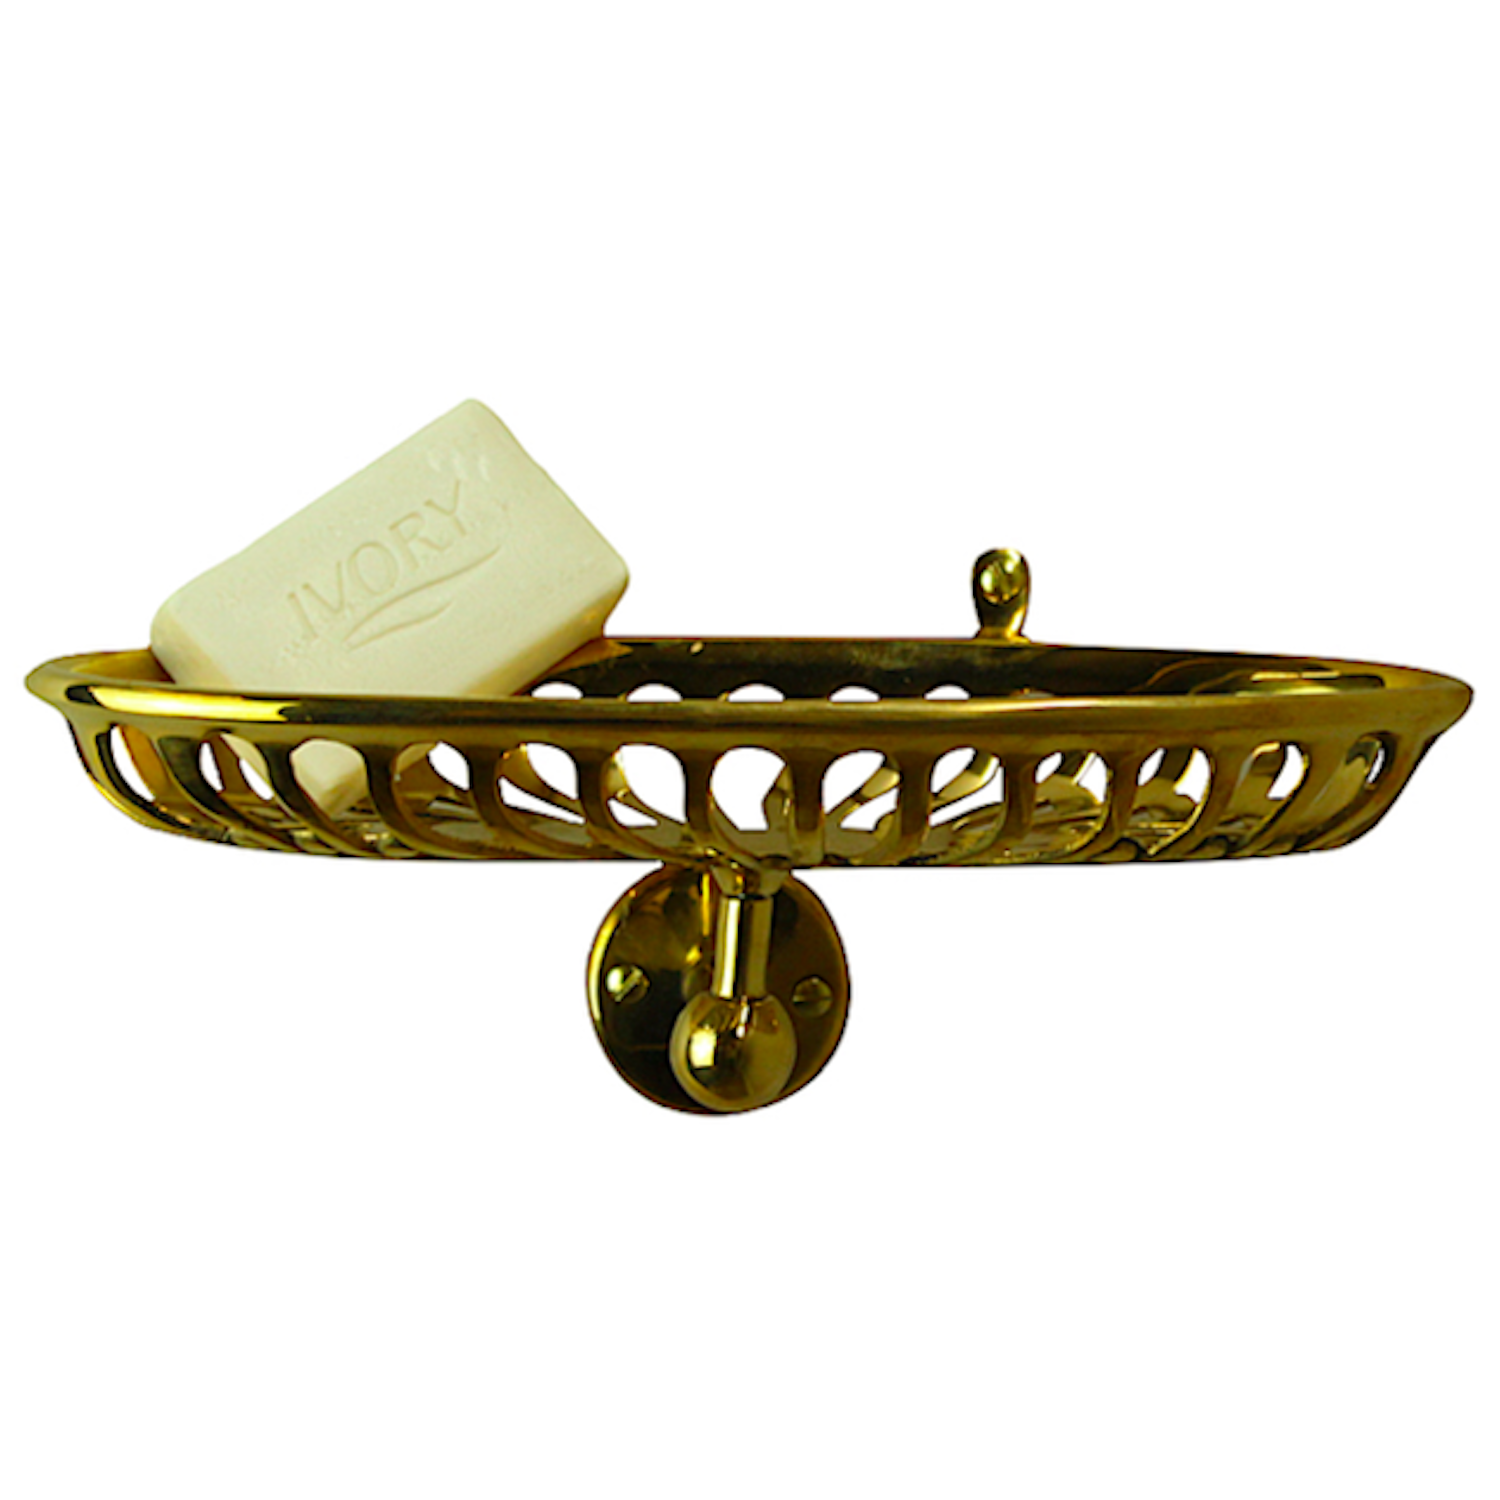 Wall Mounted Oval Soap Dish Holder or Caddy in Solid Brass